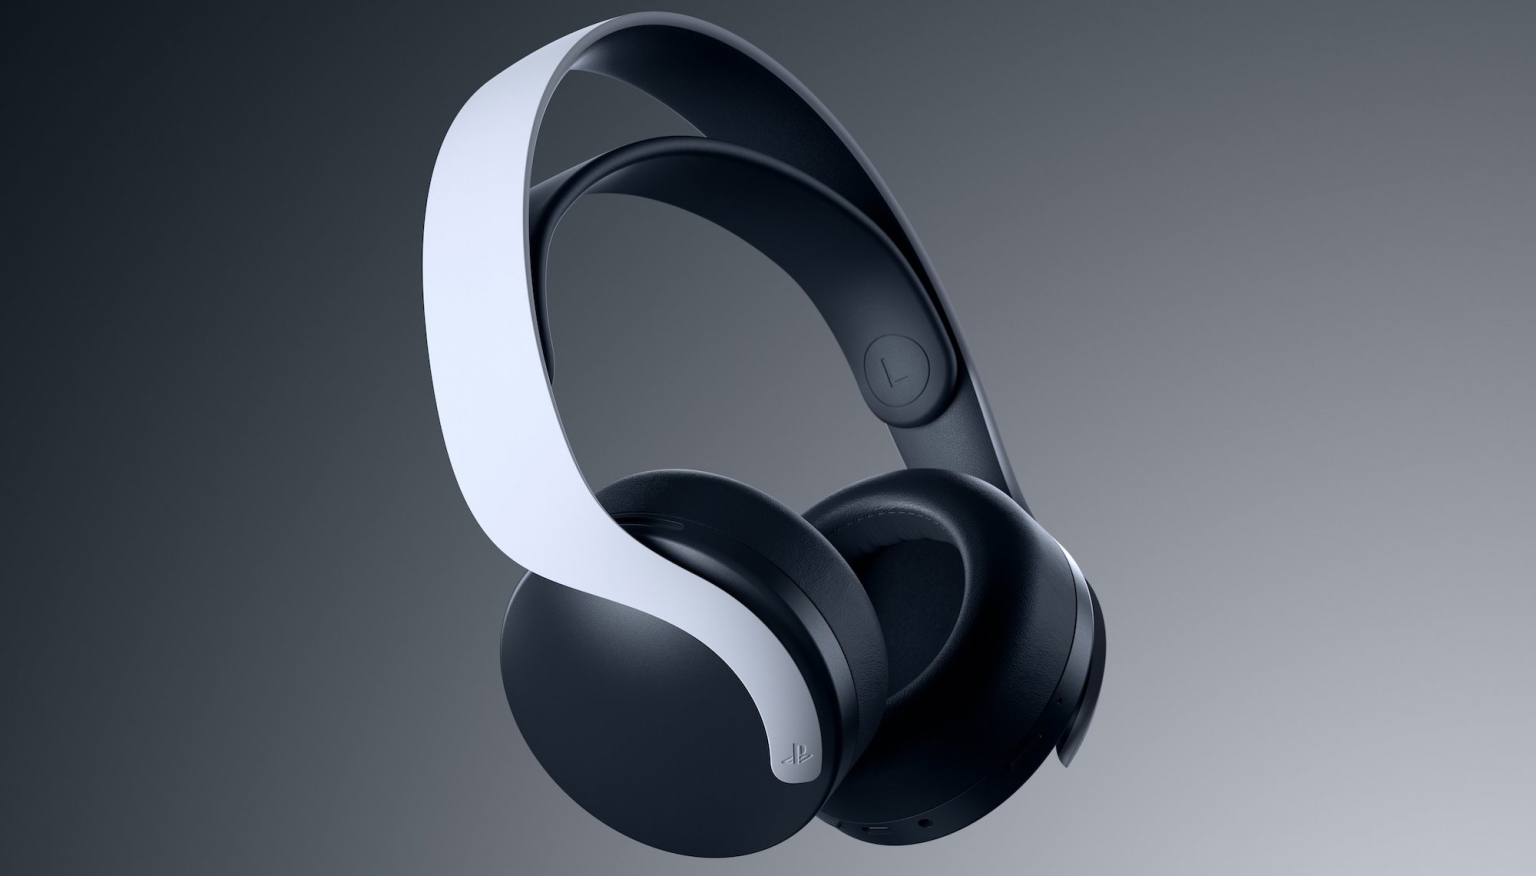 sony pulse 3d wireless headset for ps5